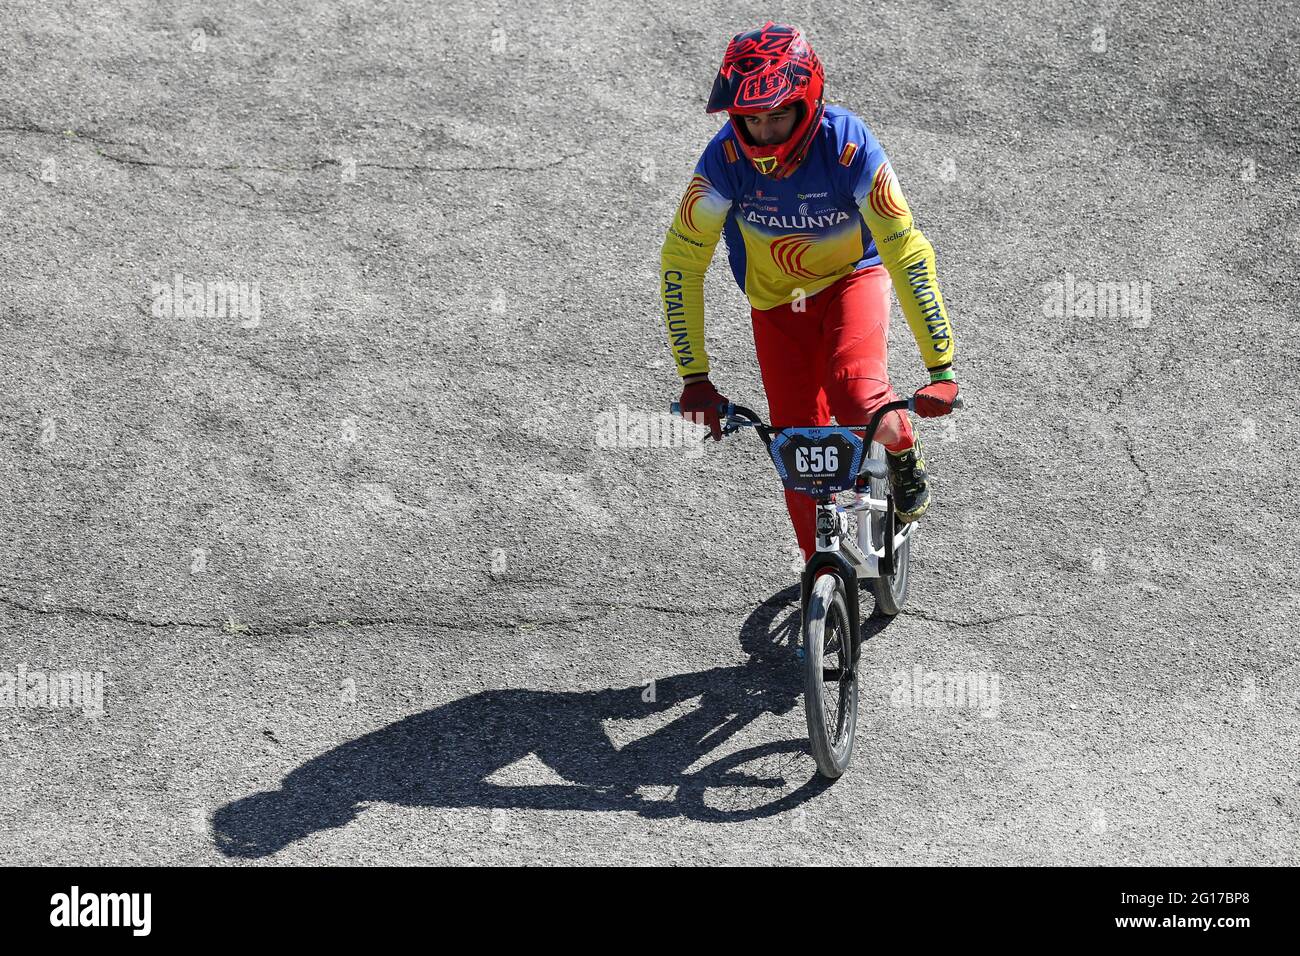 Psychologically shit Picket Ian MORILLO ALVAREZ of Spain competes in the UEC BMX European Cup Round 2  at the BMX Olympic Arena on May 2nd 2021 in Verona, Italy Stock Photo -  Alamy